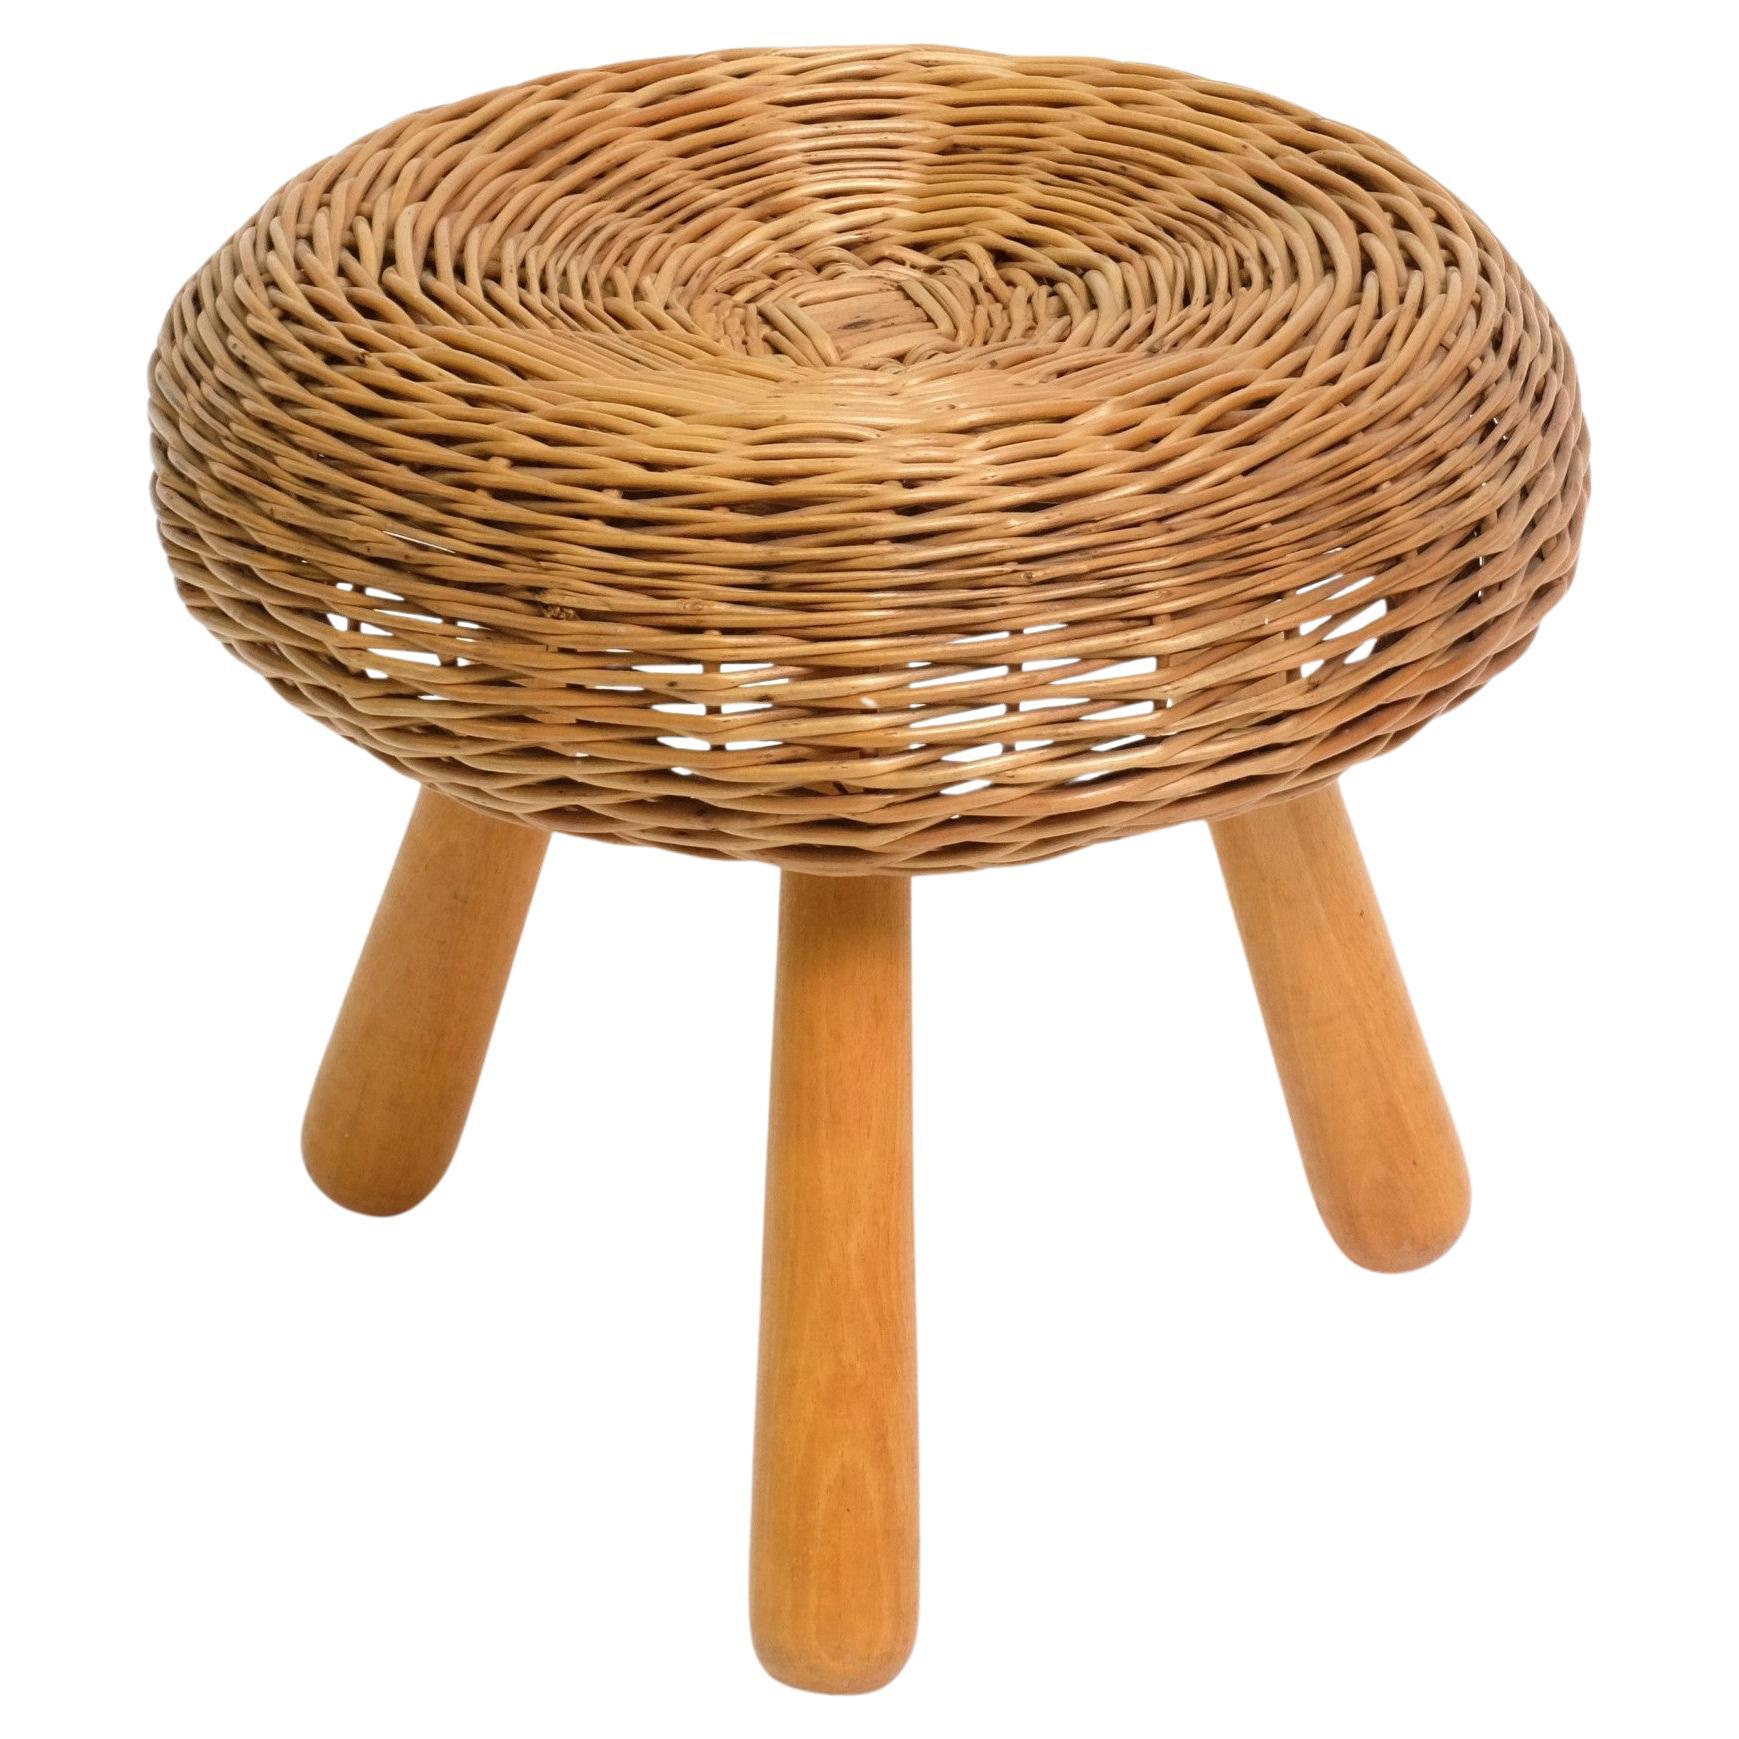 Tony Paul 'Attributed' Stool Wicker Wood, United States 1950s For Sale